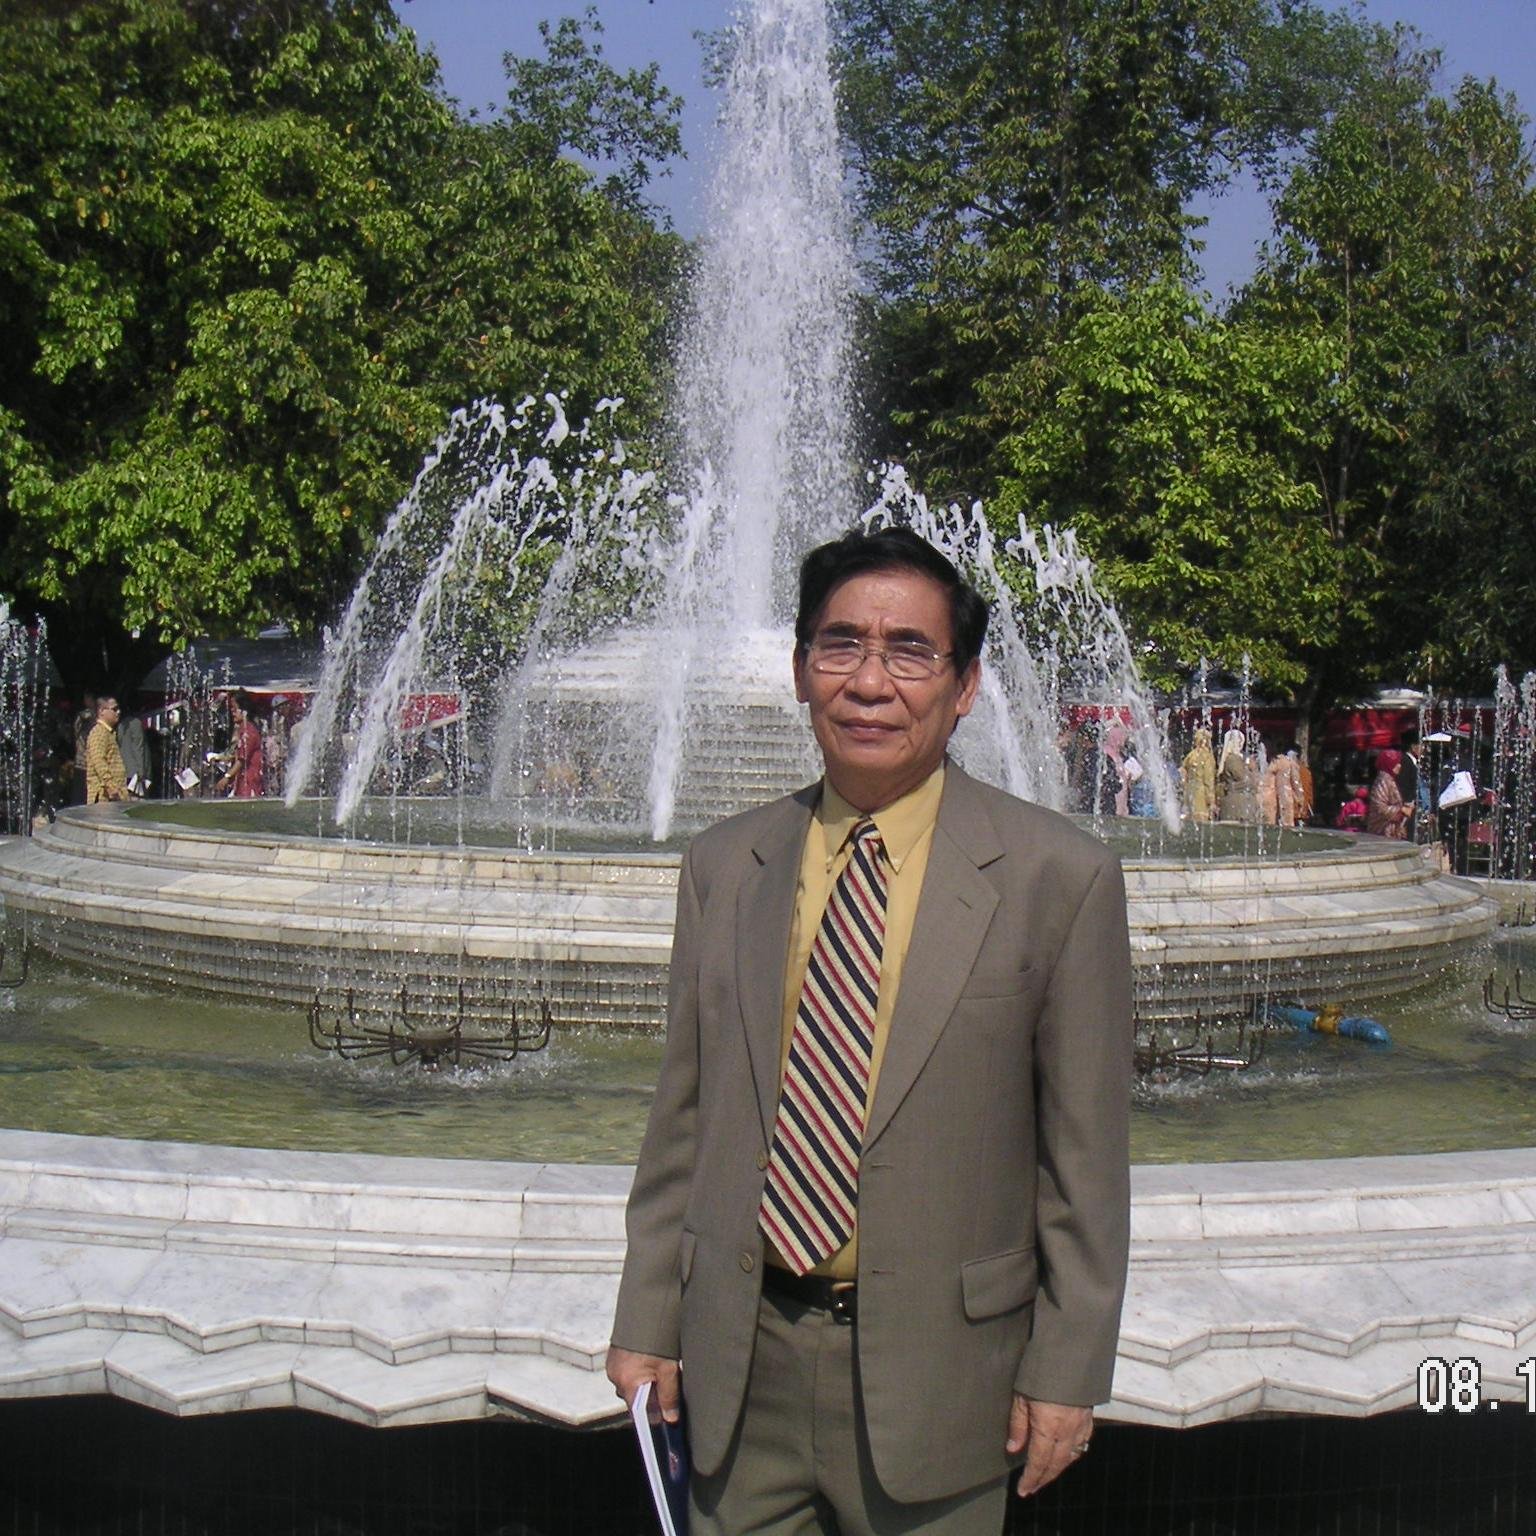 To love and to be loved by His love - Preacher, Councellor, Journalist, Consociate Jakarta Corp, E-mail timmywarouw@gmail.com